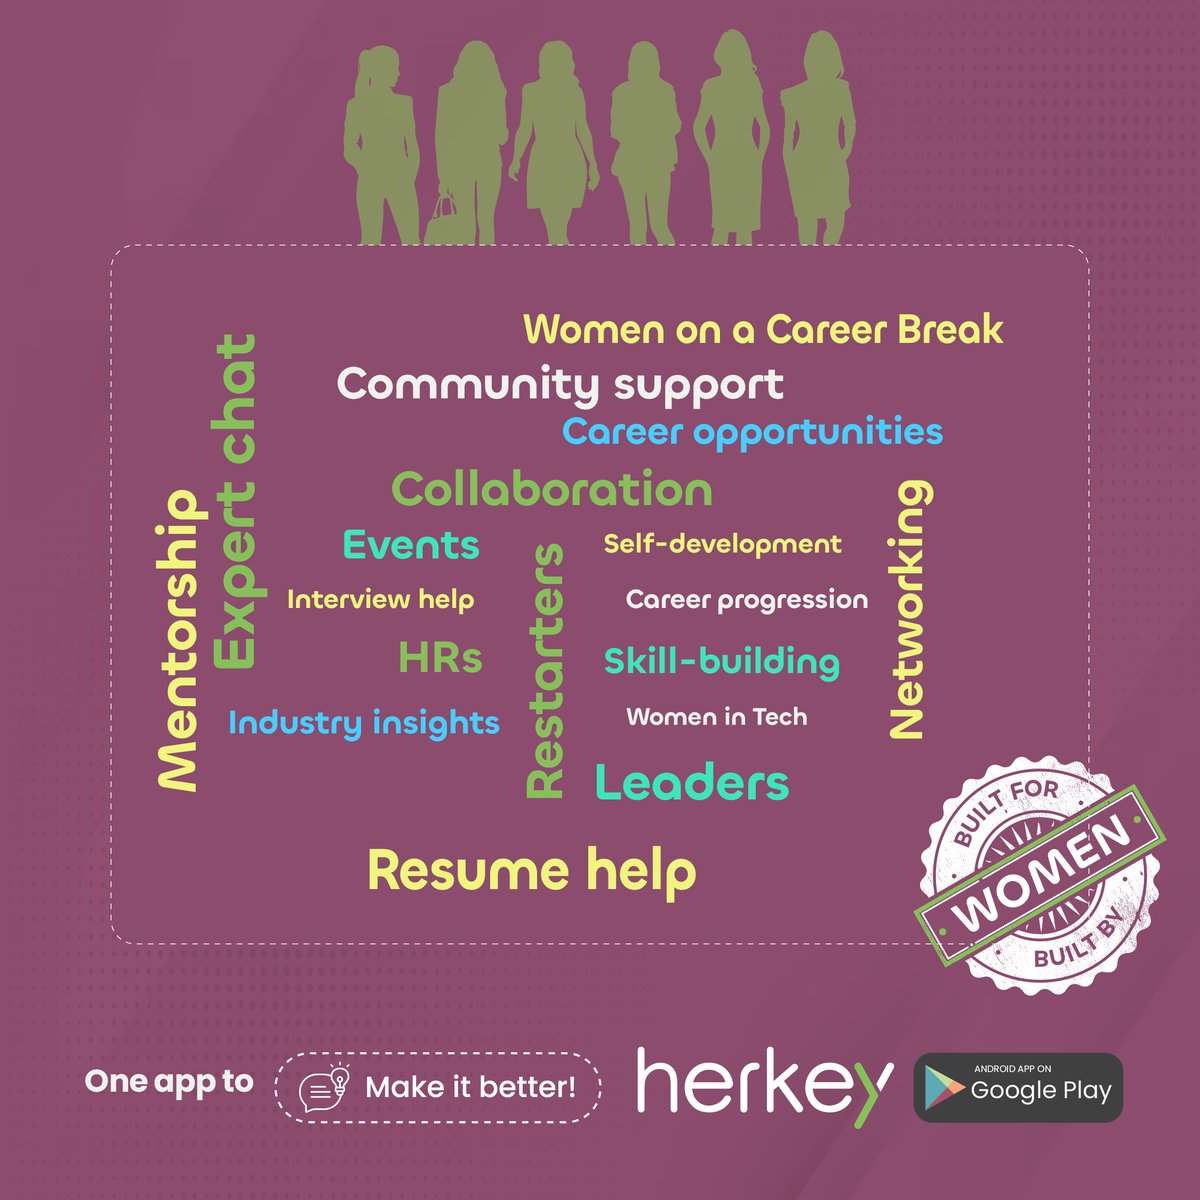 With HerKey, #MakeItBetter is not just a slogan—it's our commitment to providing you with the best resources and support for your career journey.

Download HerKey now.
📷tinyurl.com/34scs9wb

IOS users can access the new platform at : tinyurl.com/3satft58